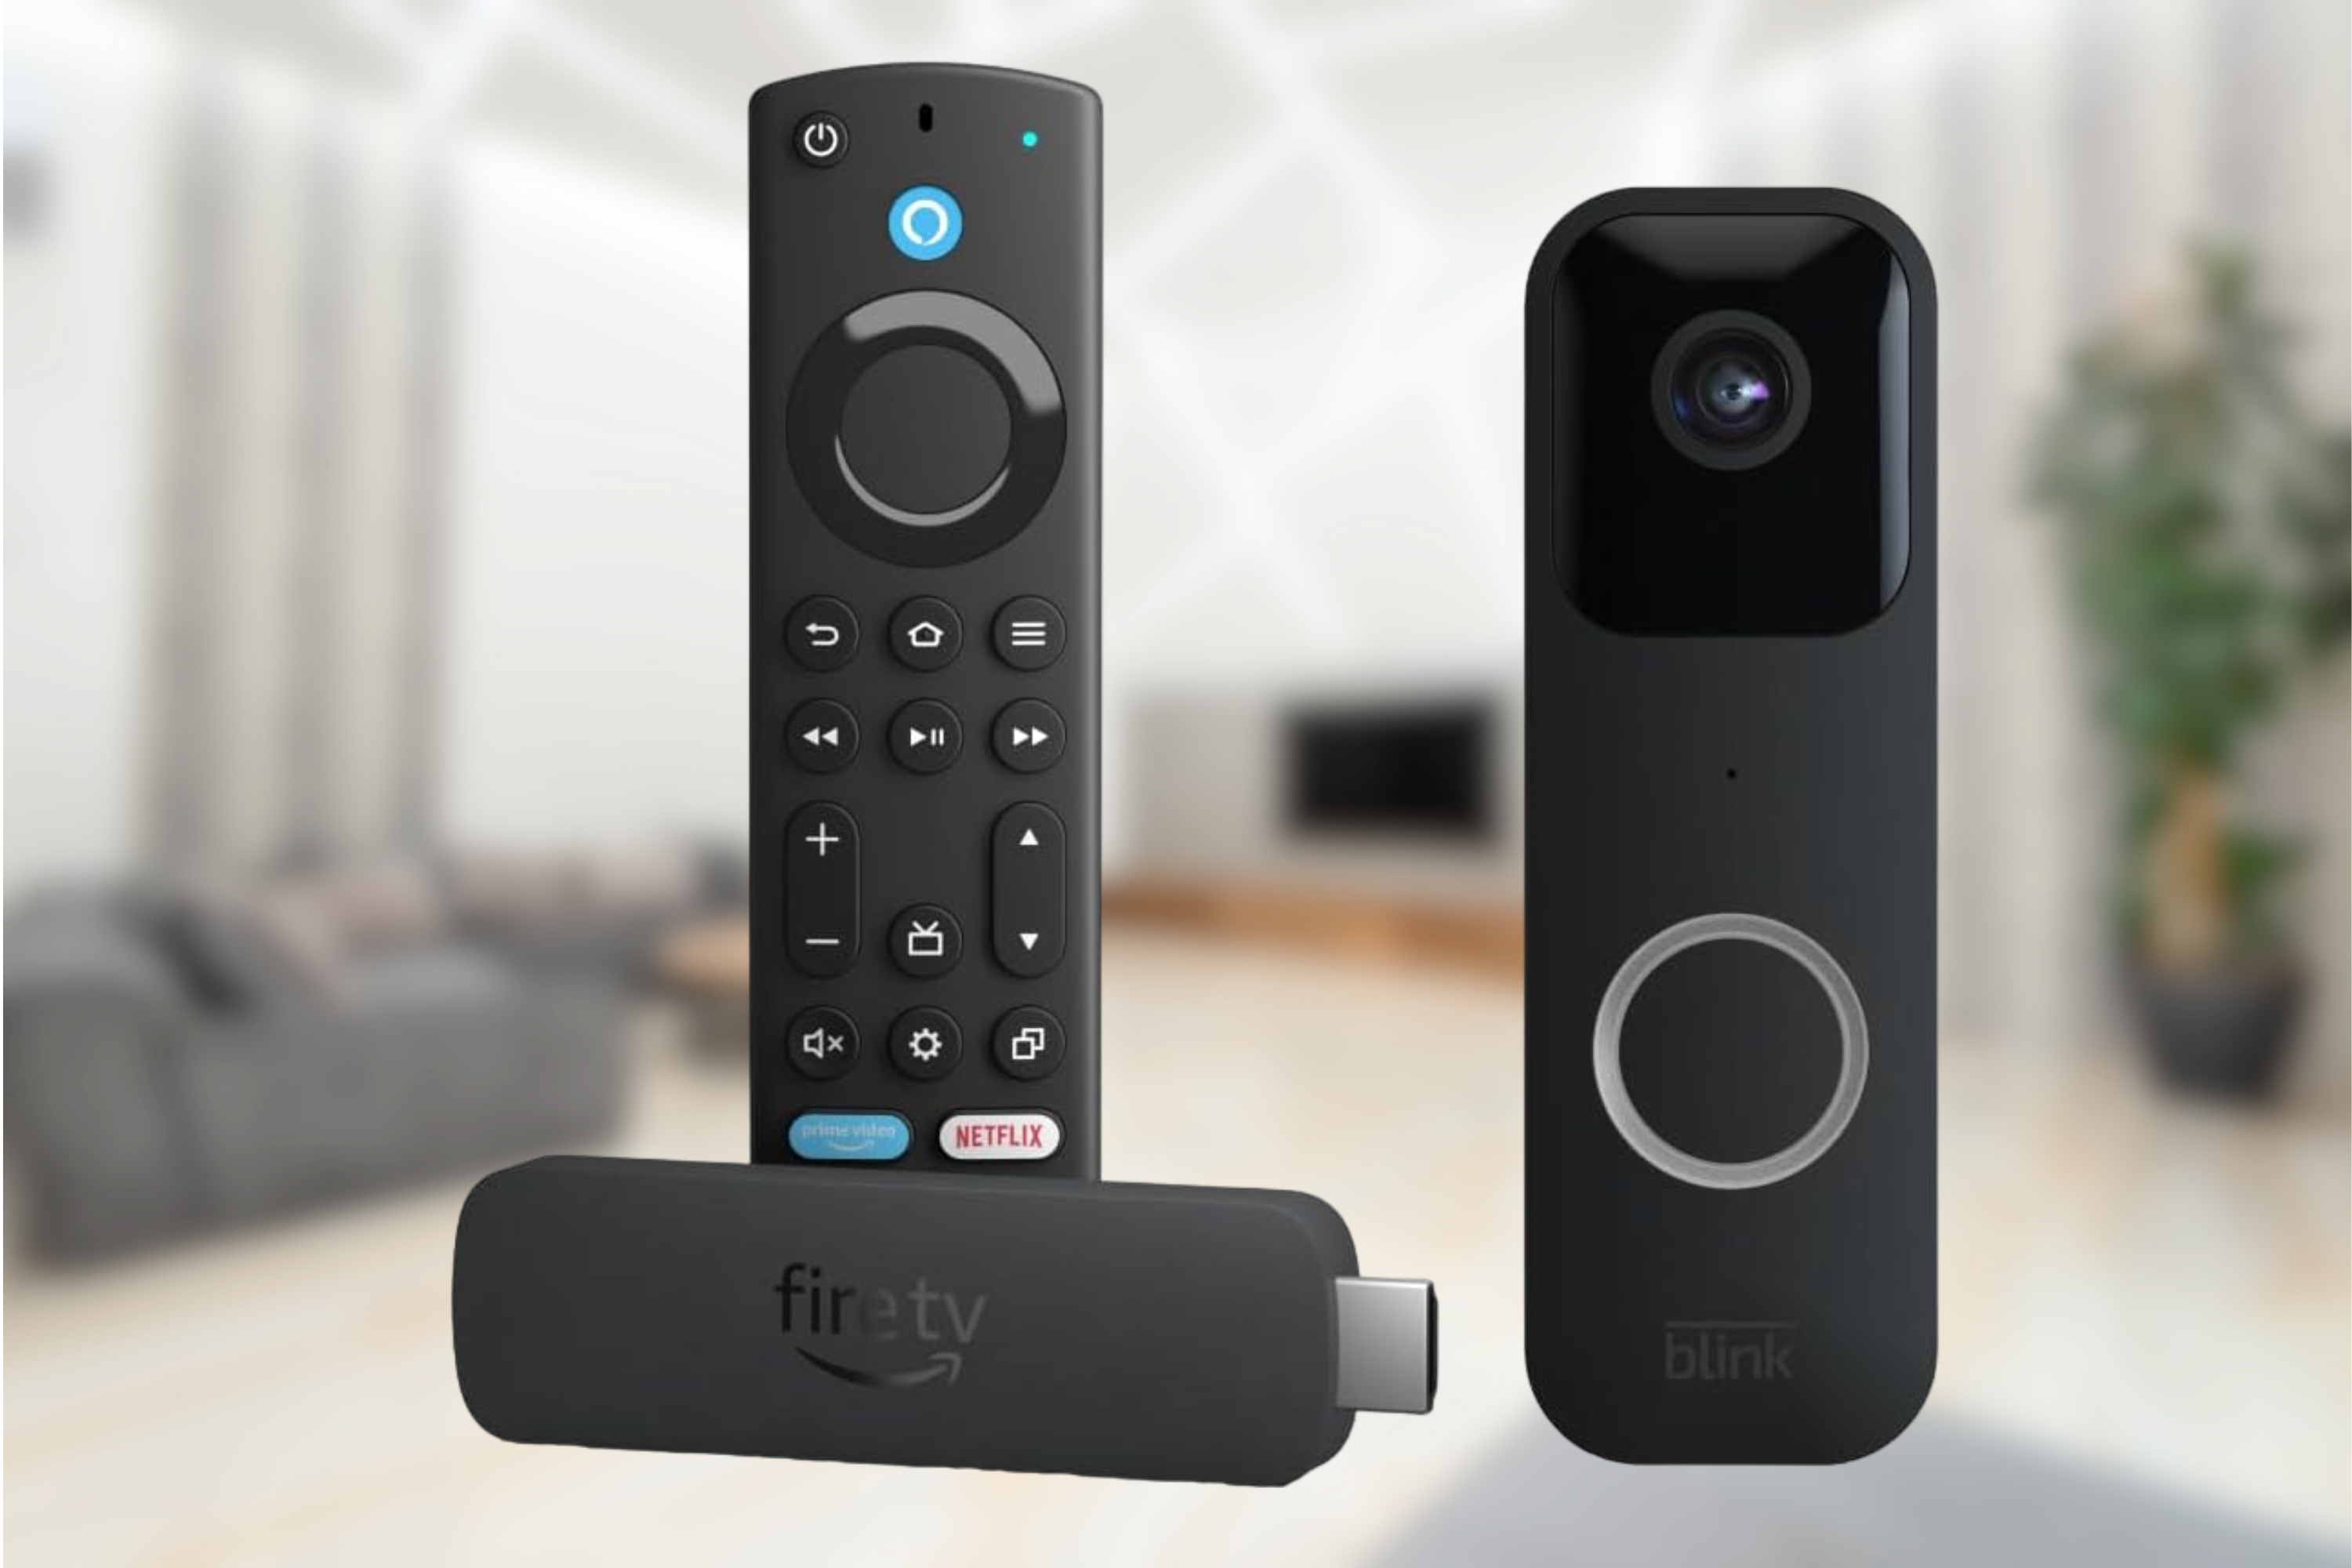 Amazon Fire TV Stick 4K Max bundle with Blink Video Doorbell on blurred living room background 